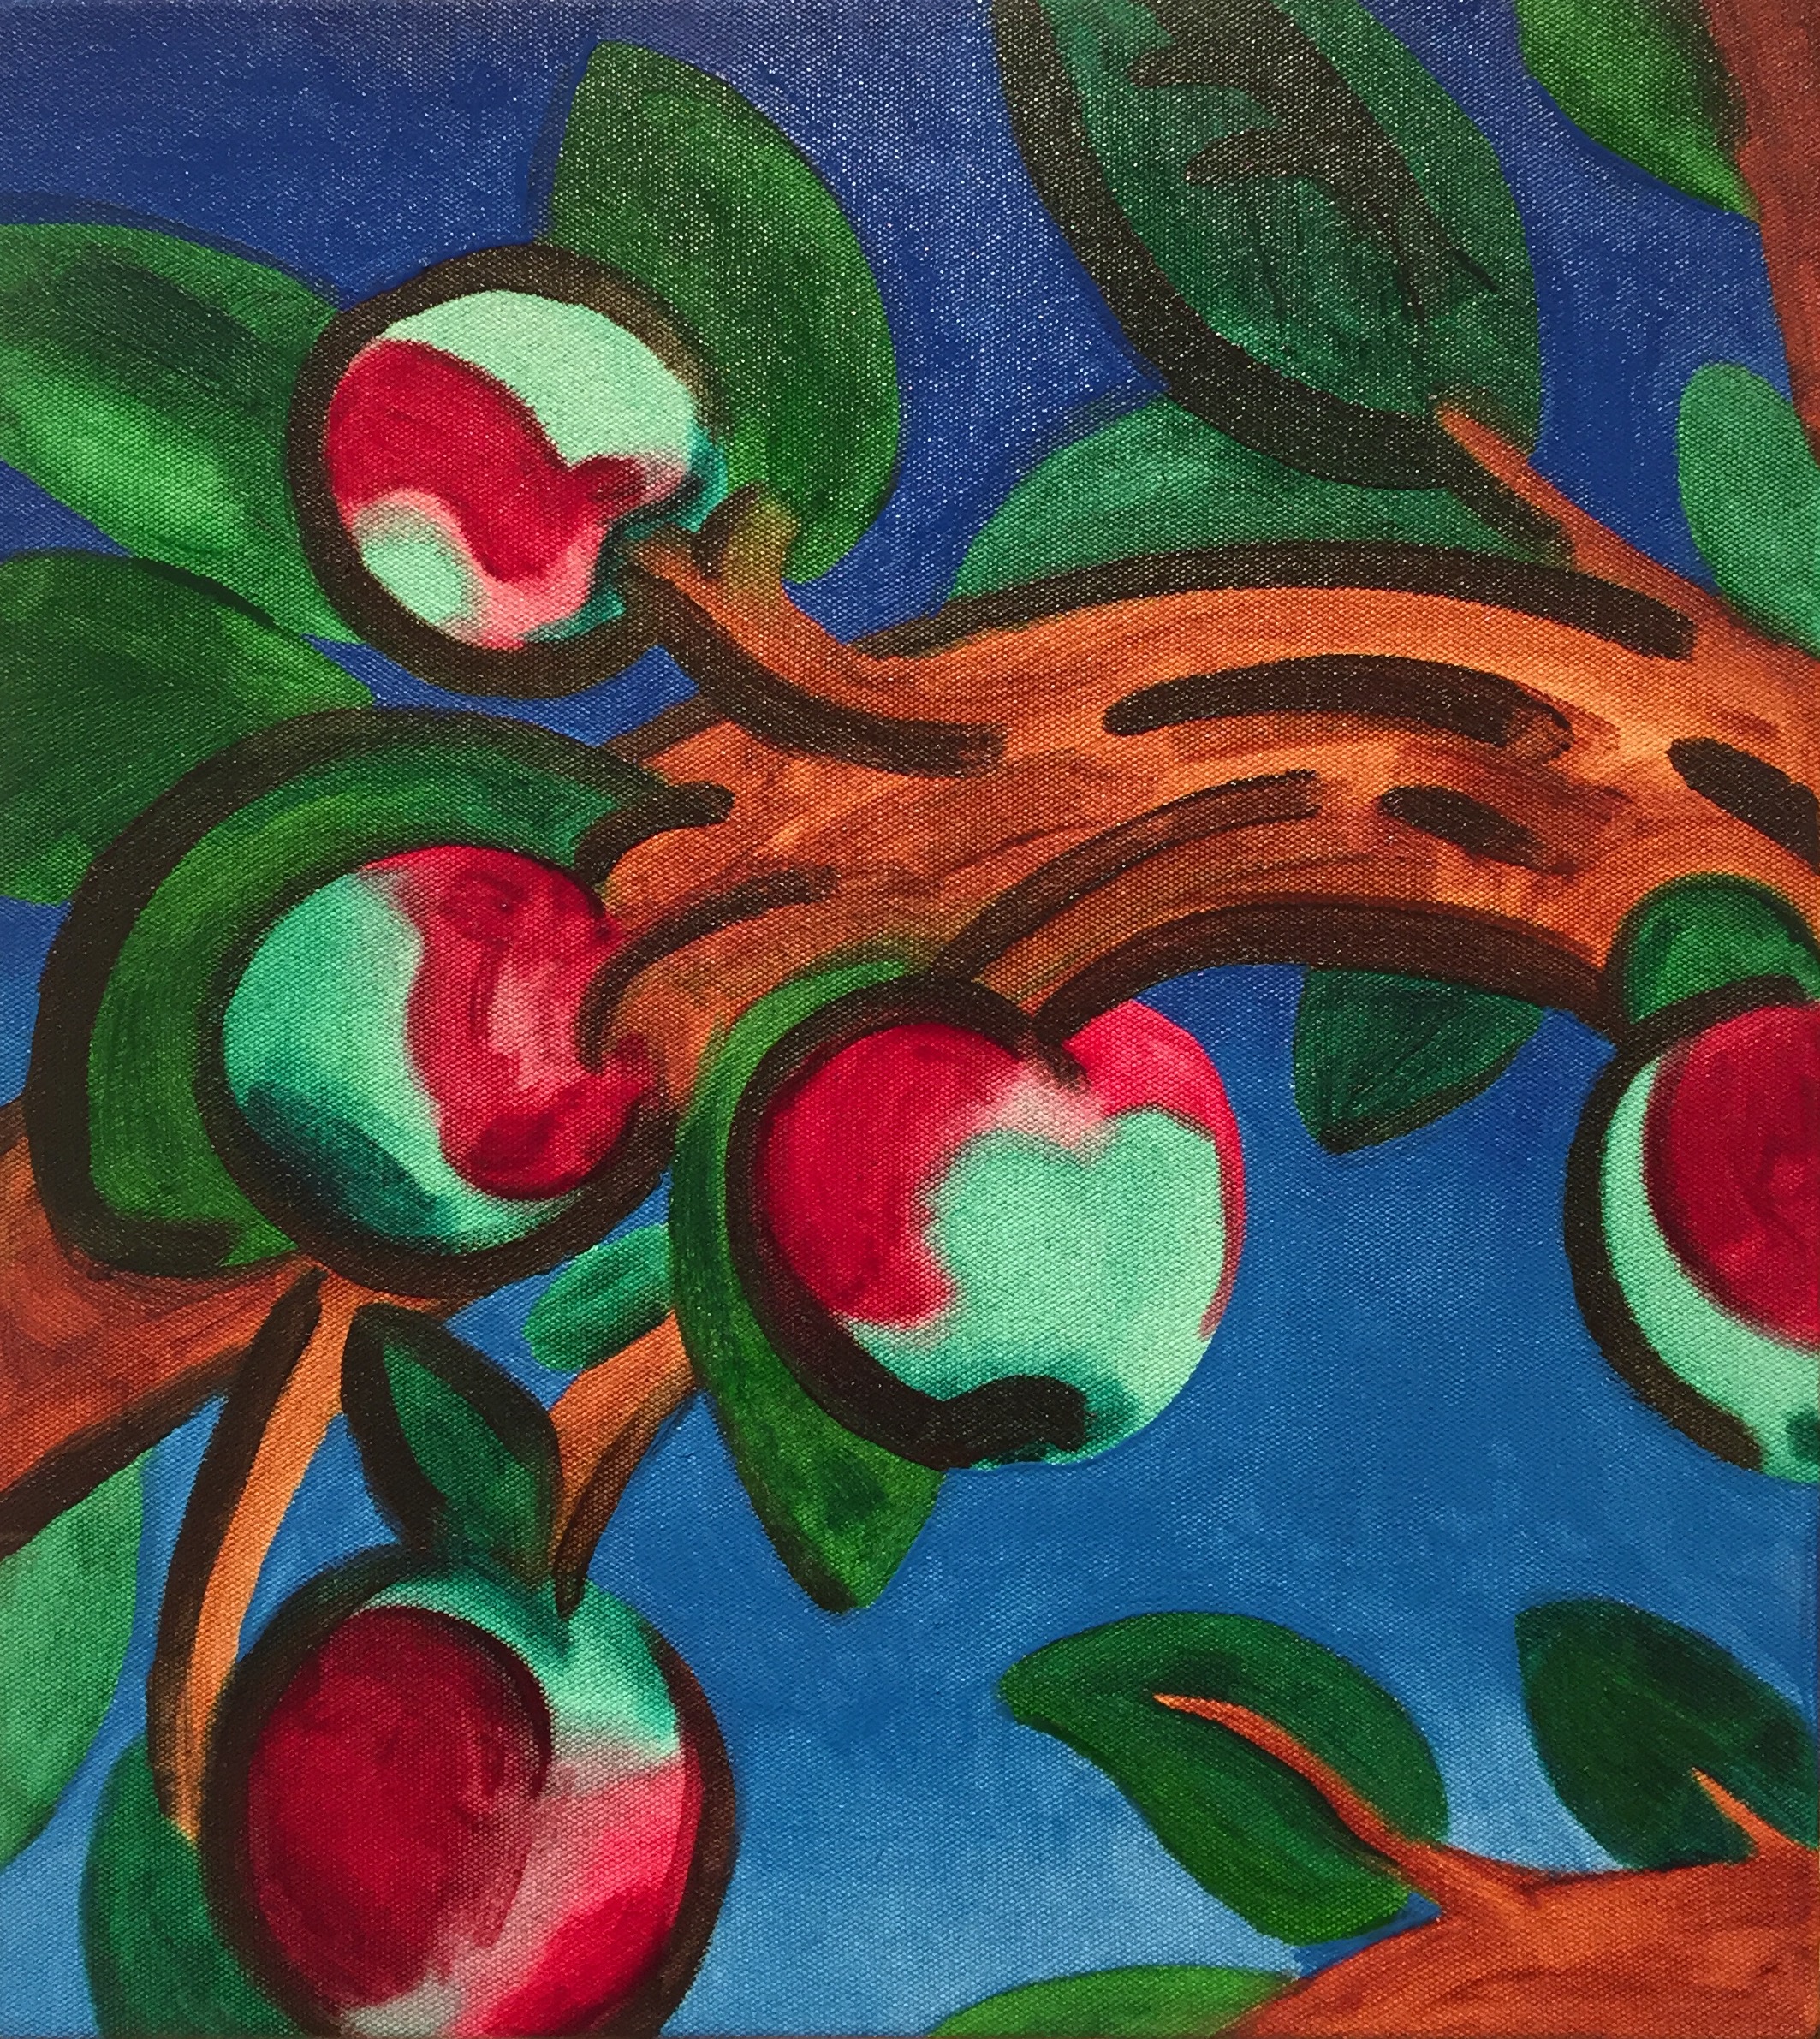 Untitled (Apples)